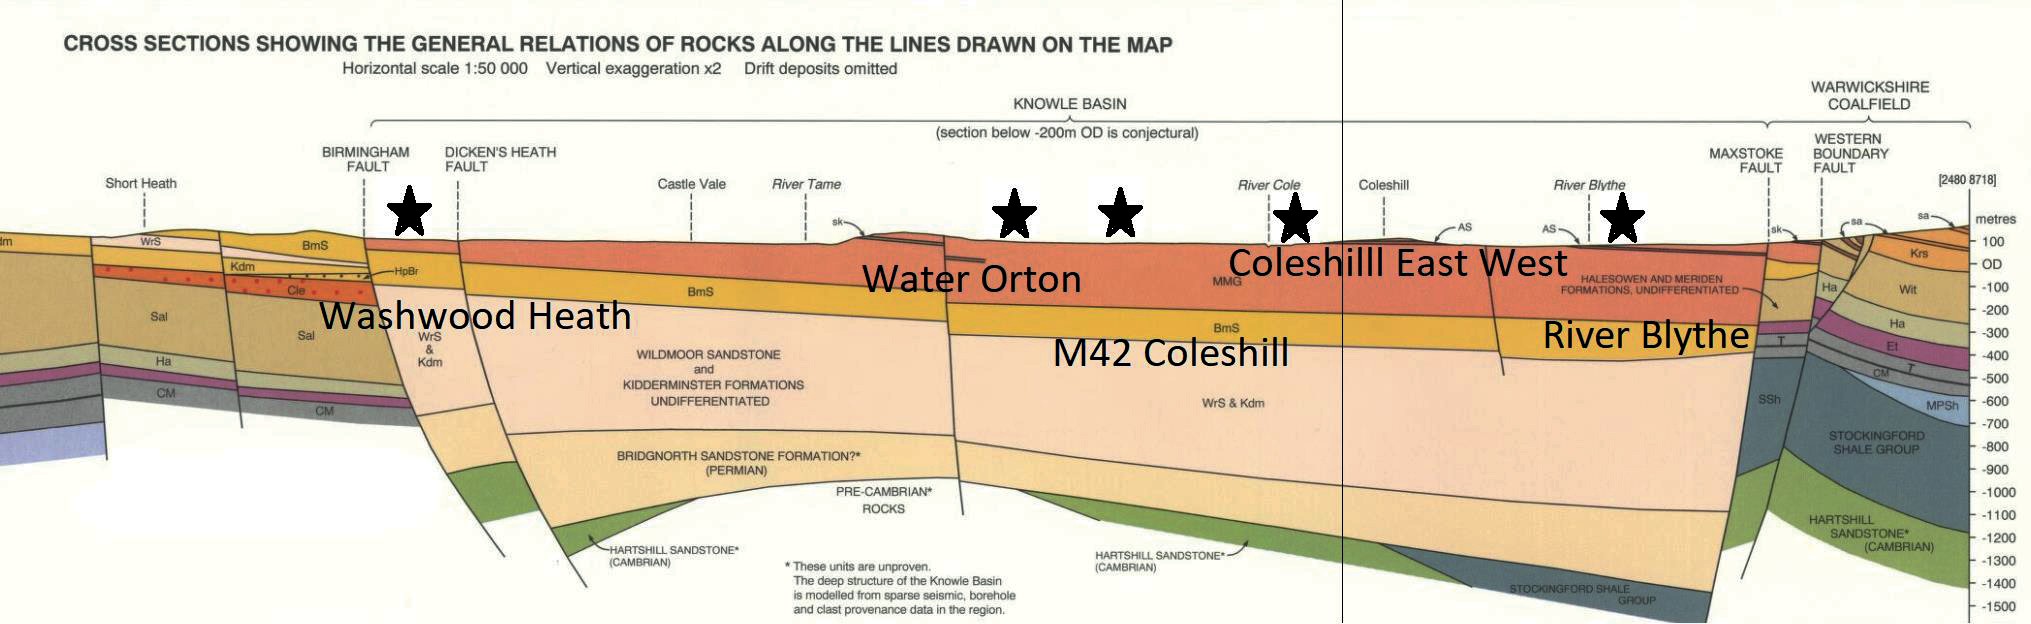 Map of generalised cross section of geology through the Knowle Basin